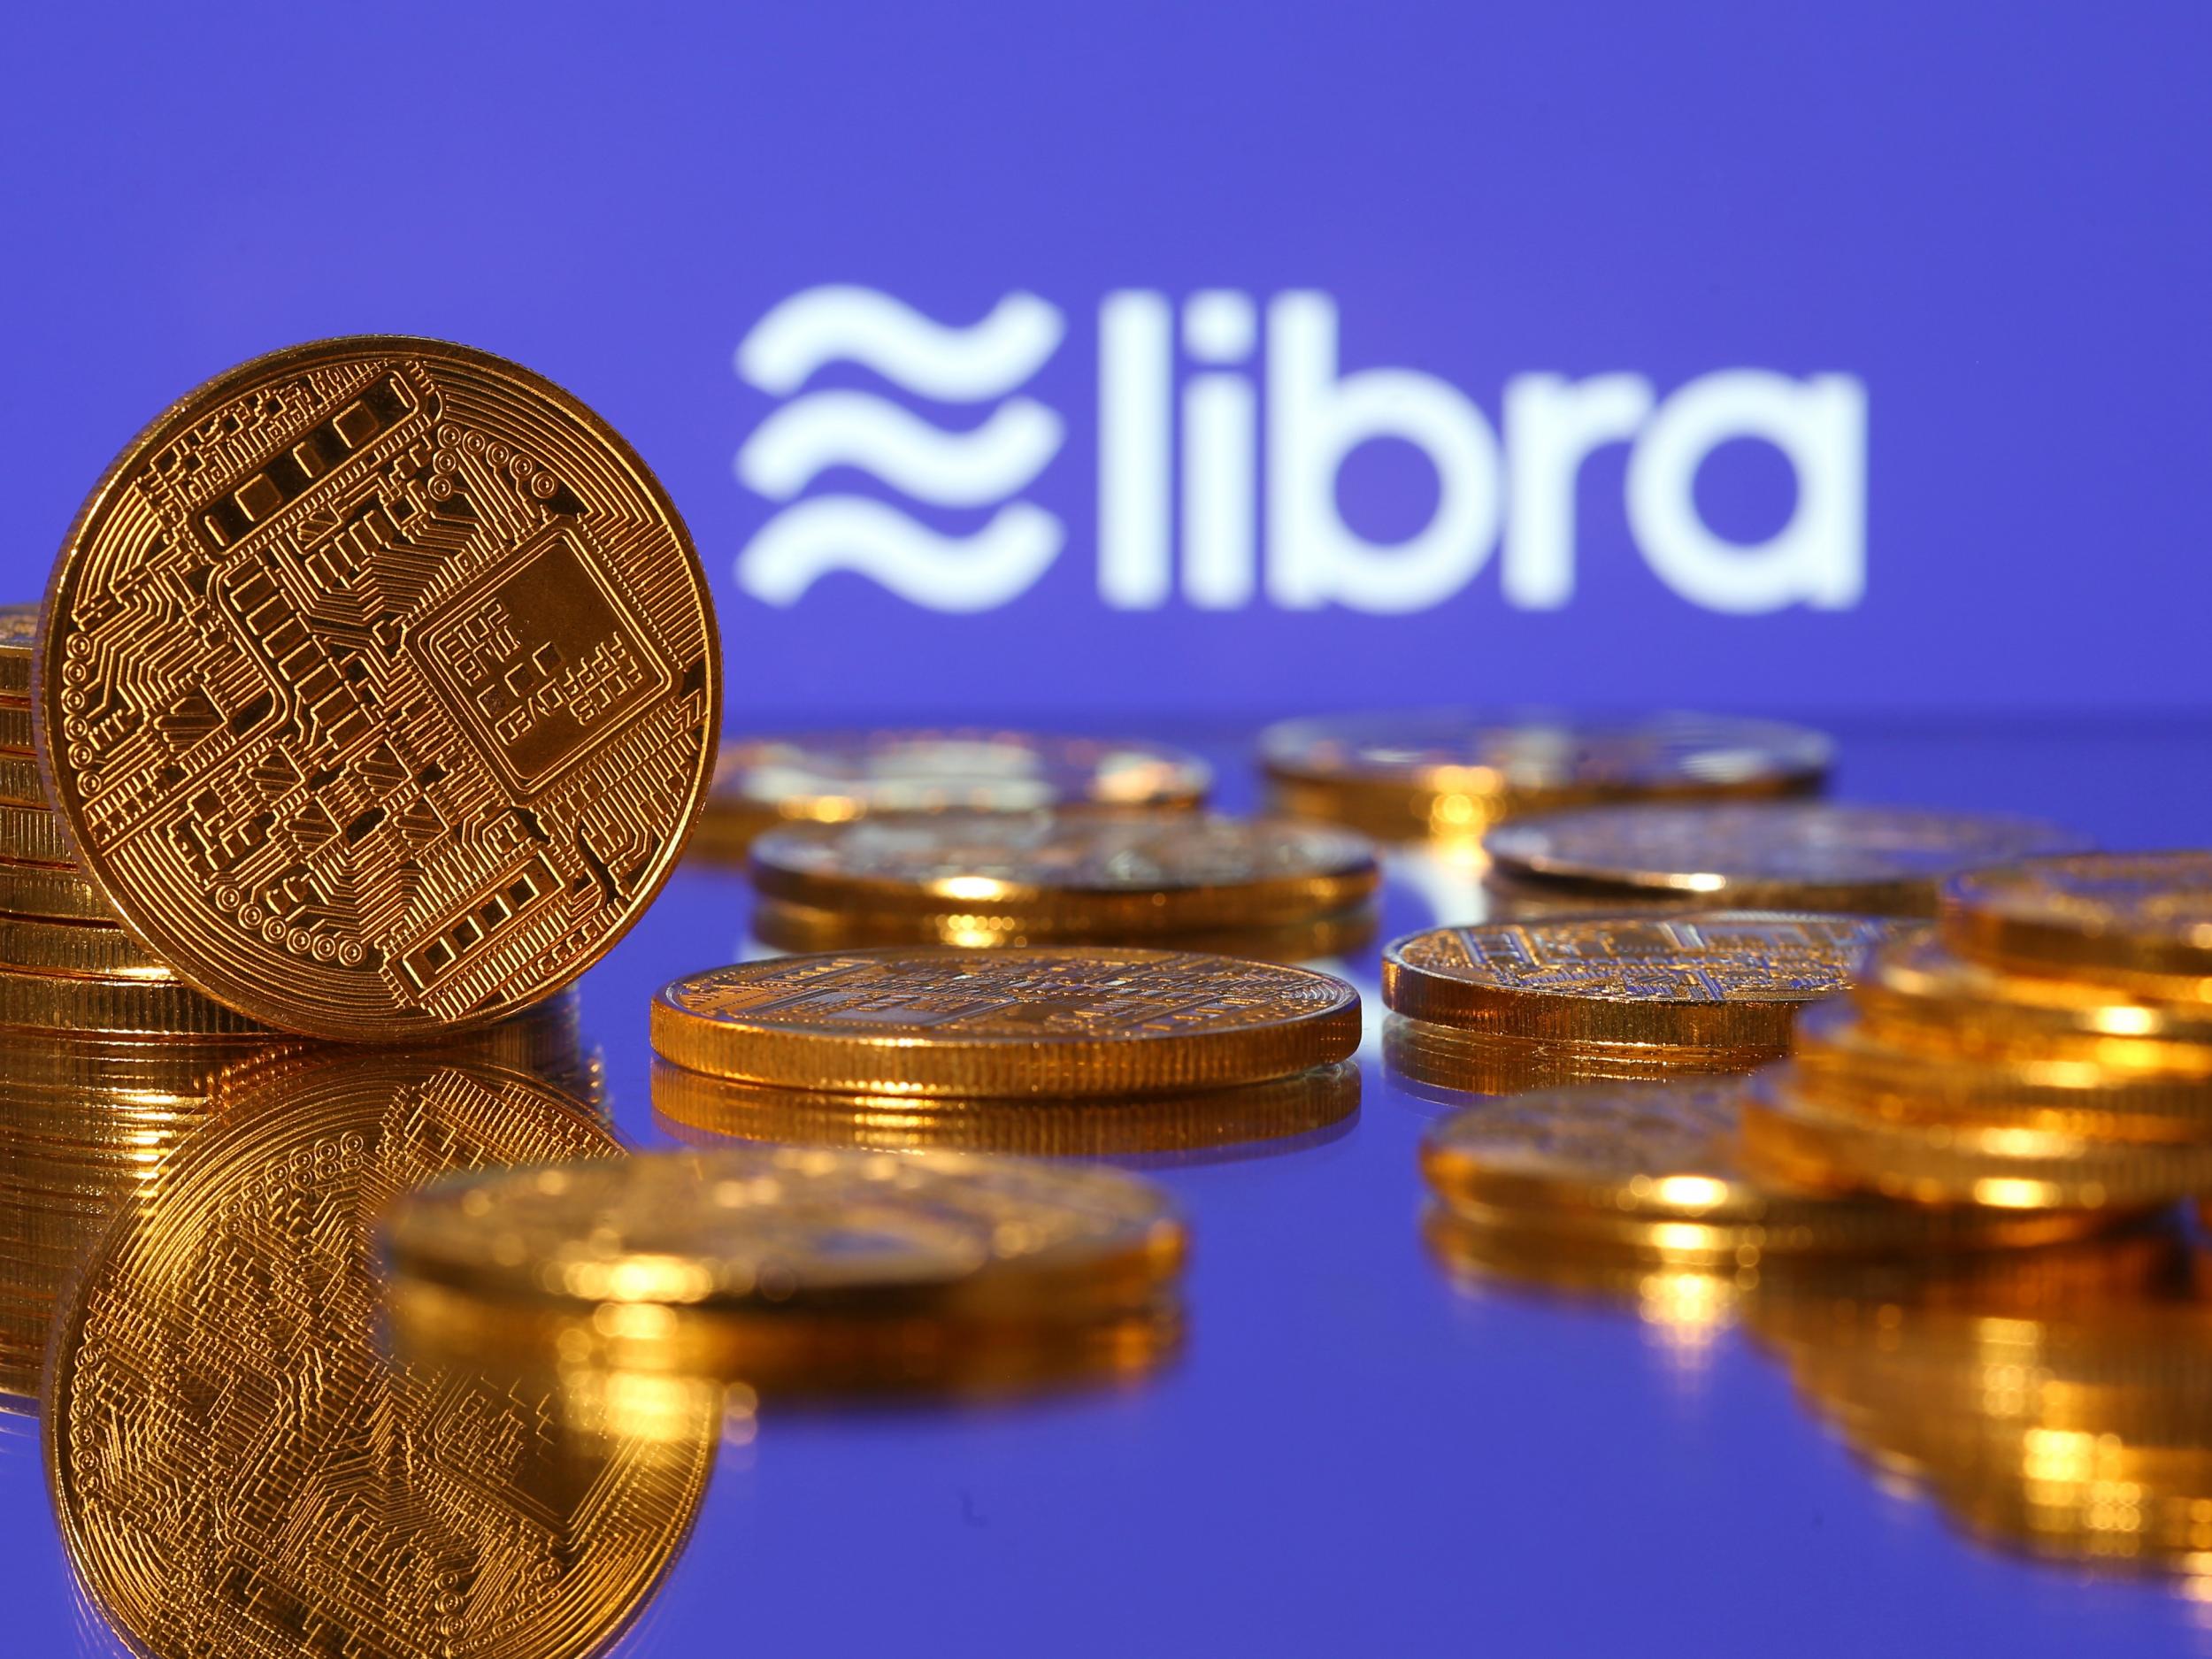 Facebook hopes to launch its Libra cryptocurrency in 2020, but is facing significant resistance from regulators around the world